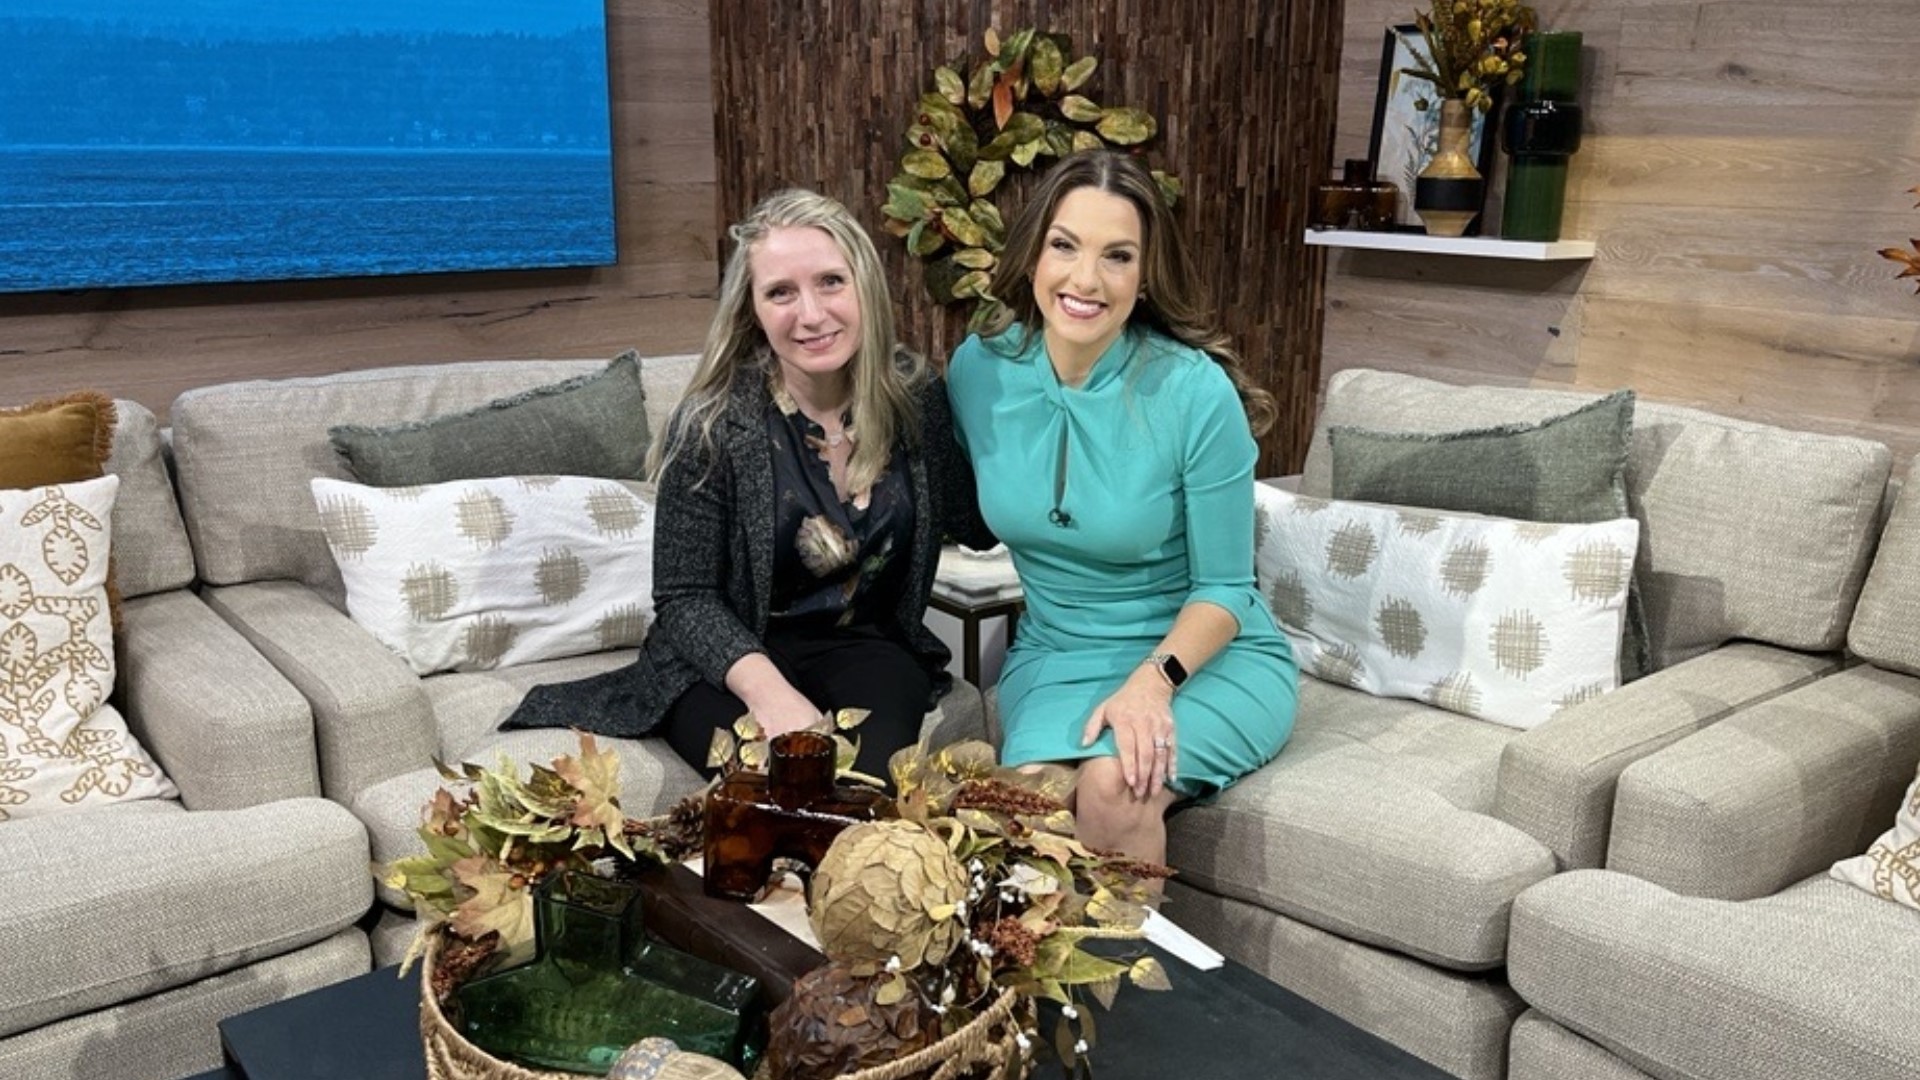 Dr. Stephanie Harper explains how women and men can experience different symptoms with some mental illnesses. Sponsored by Virginia Mason Franciscan Health.